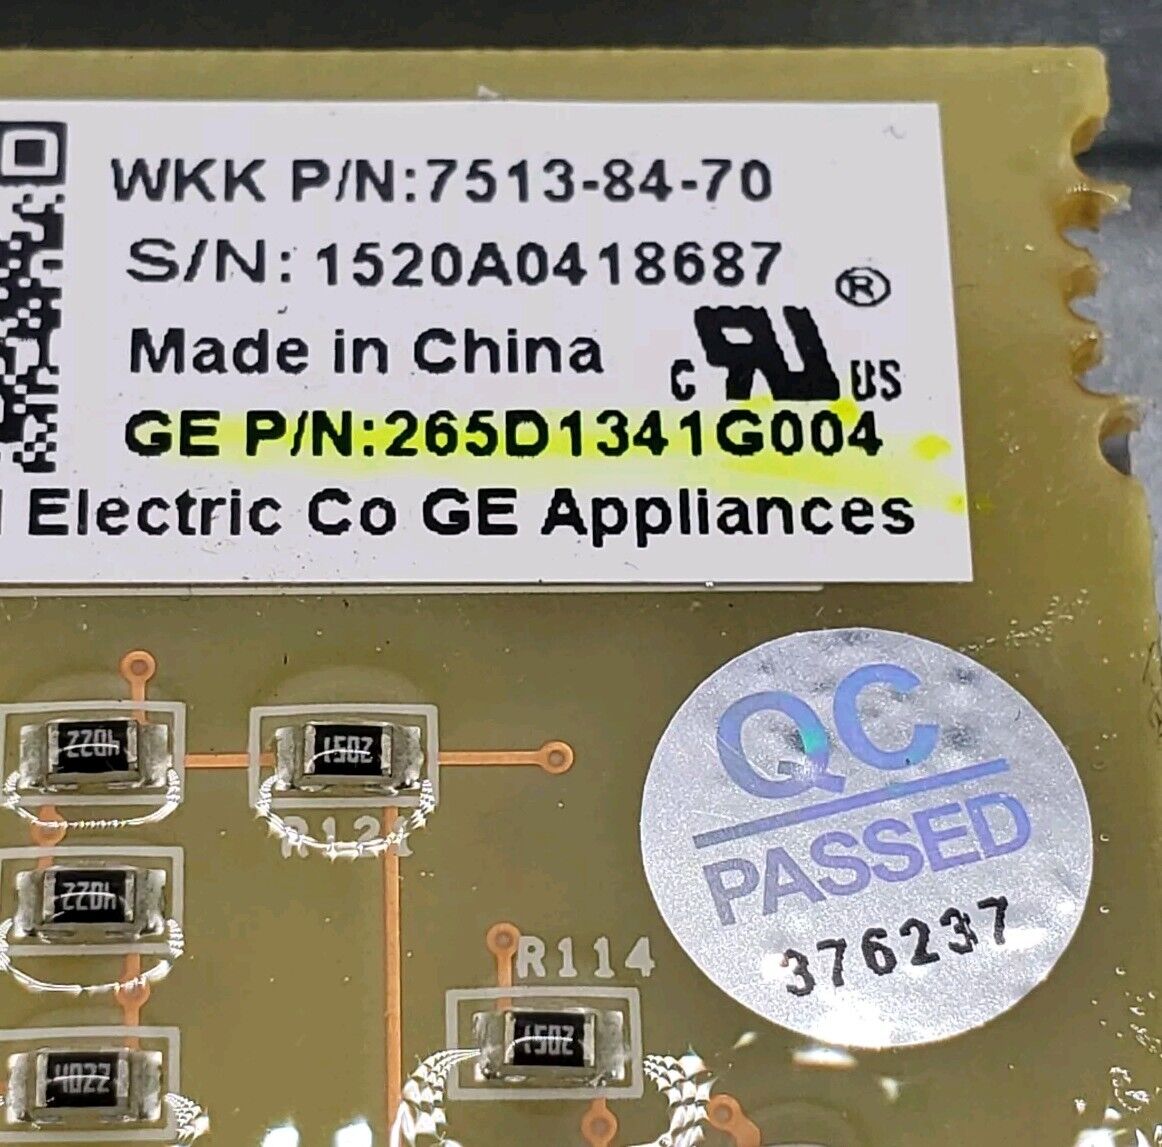 OEM Replacement for GE Dishwasher Control 265D1341G004